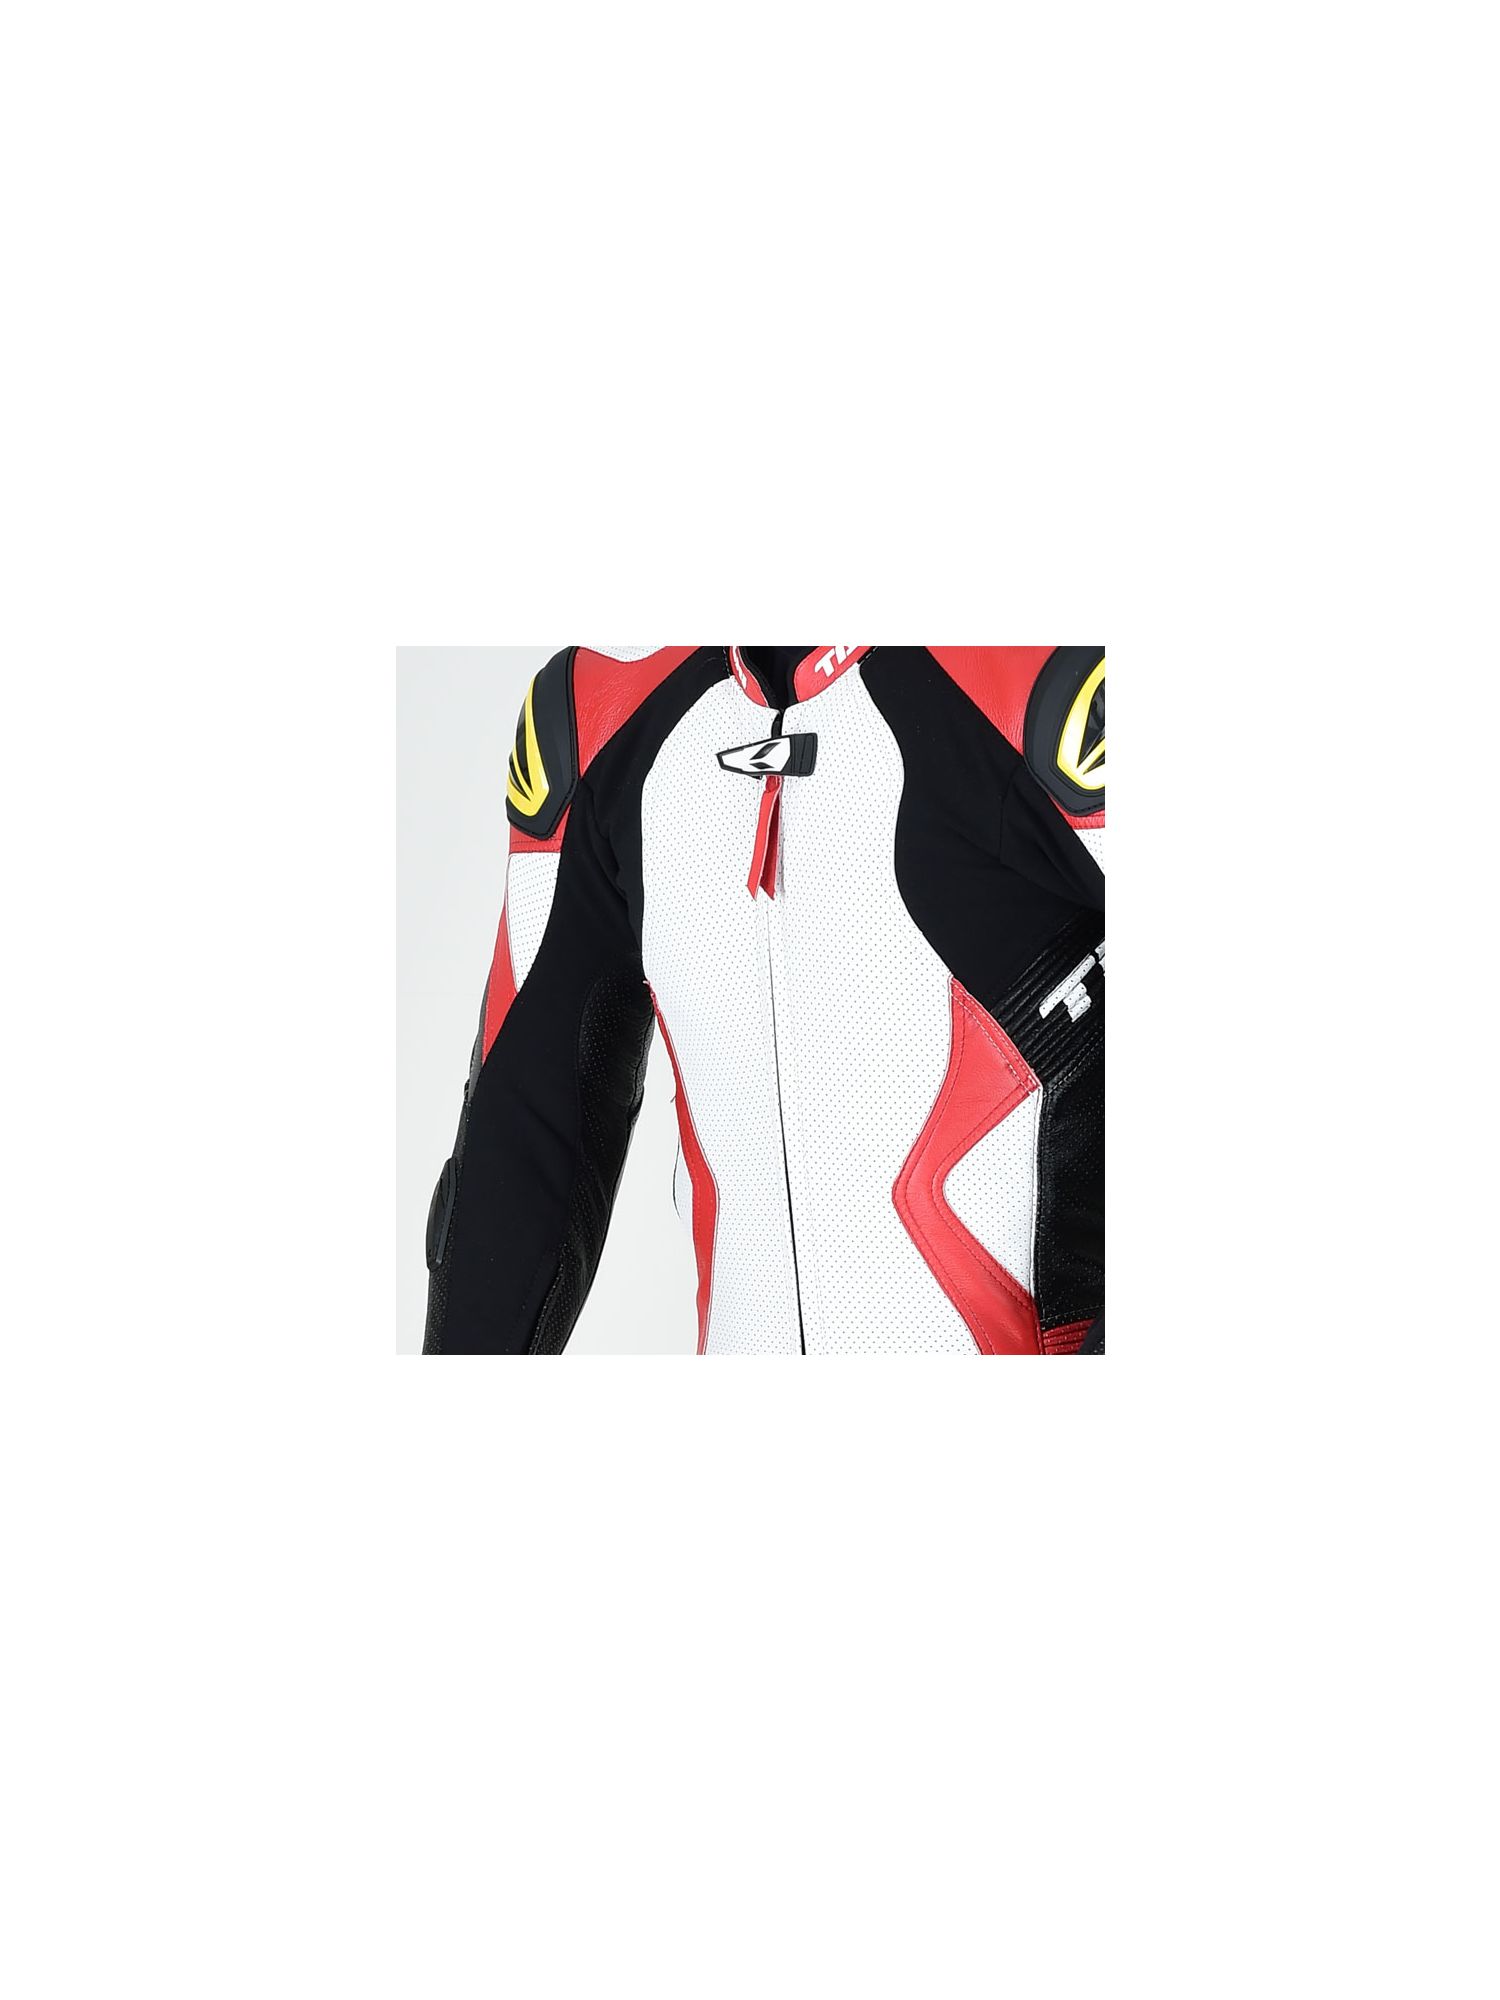 NXL103 | GP-MAX R103 LEATHER SUIT[受注生産]［3colors］